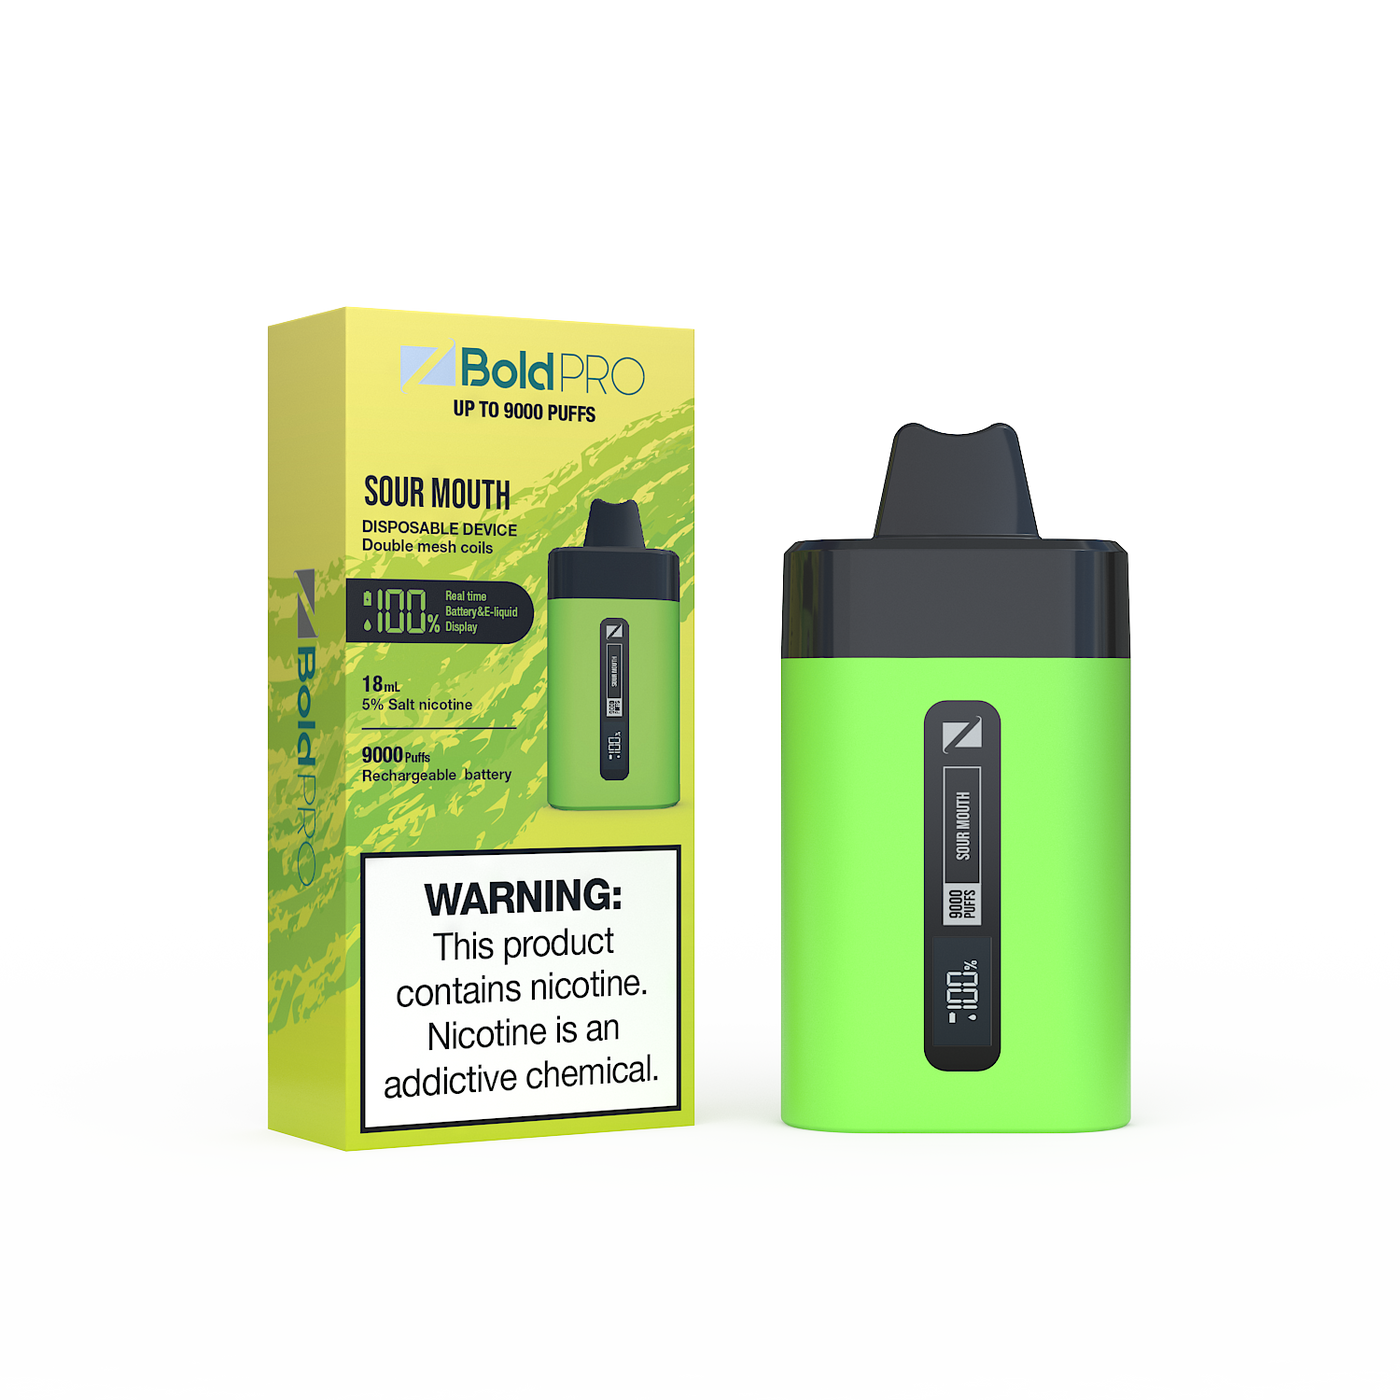 Z Bold Pro - Sour Mouth - 9000 Puffs - LED Screen with Juice and Battery Indicator